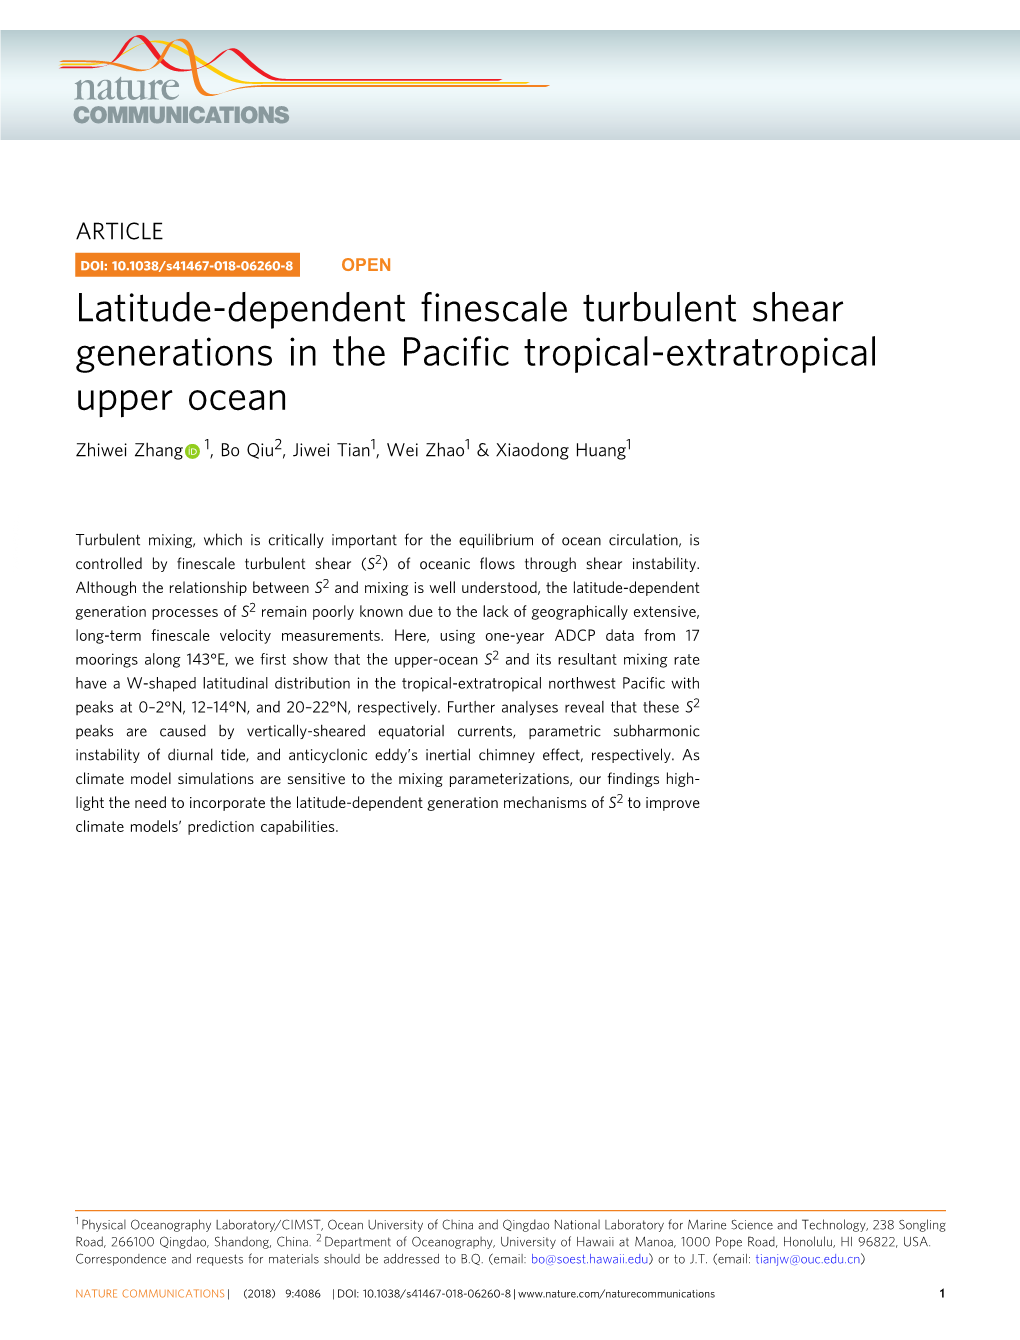 Latitude-Dependent Finescale Turbulent Shear Generations in The